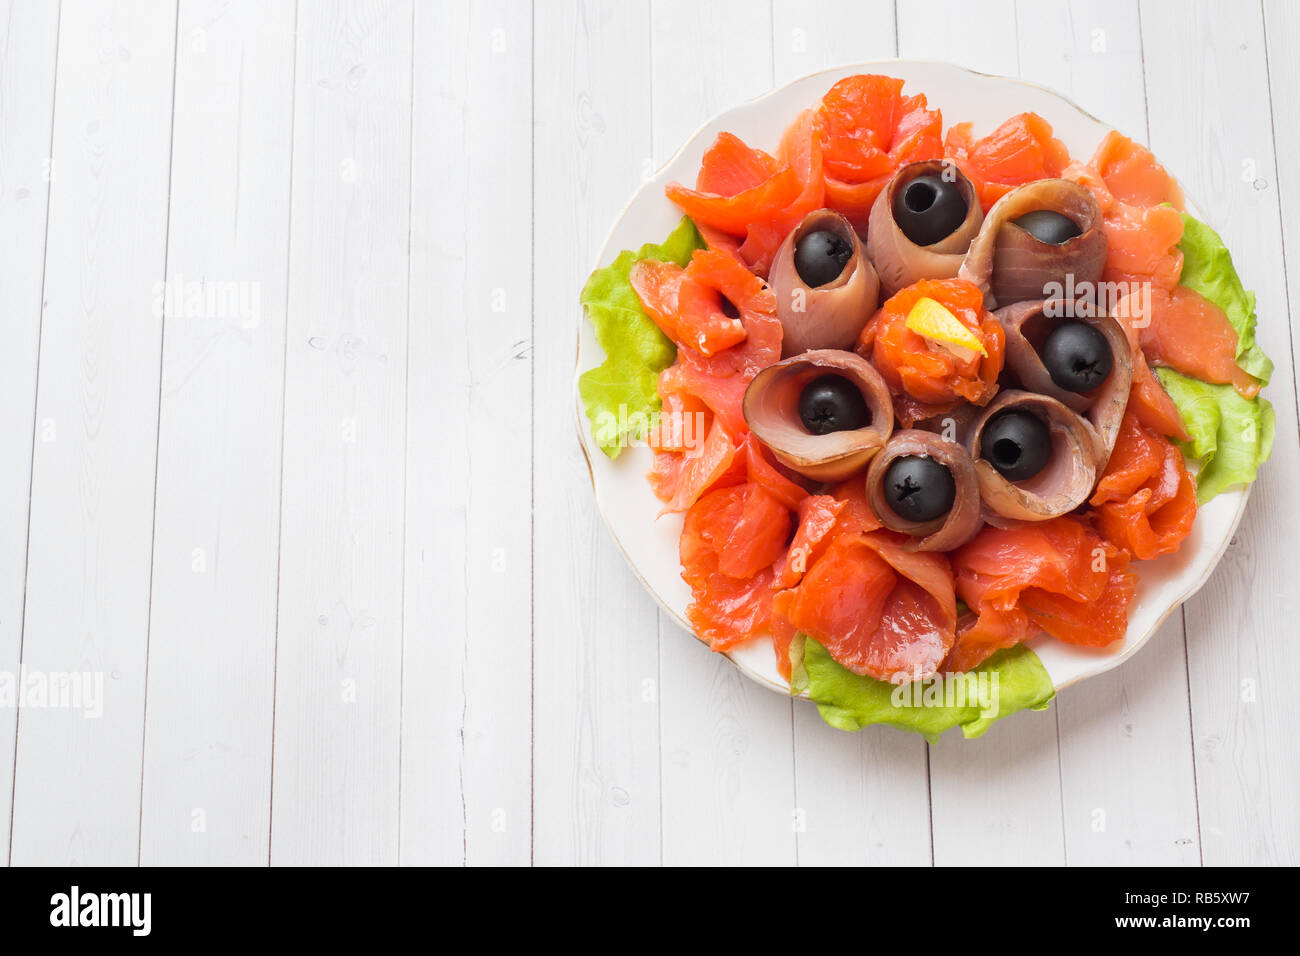 Gourmet restaurant serving a plate of smoked salt, raw white fish fillets and salmon. Delicacy fresh seafood dish with catfish, salmon meat with olive Stock Photo